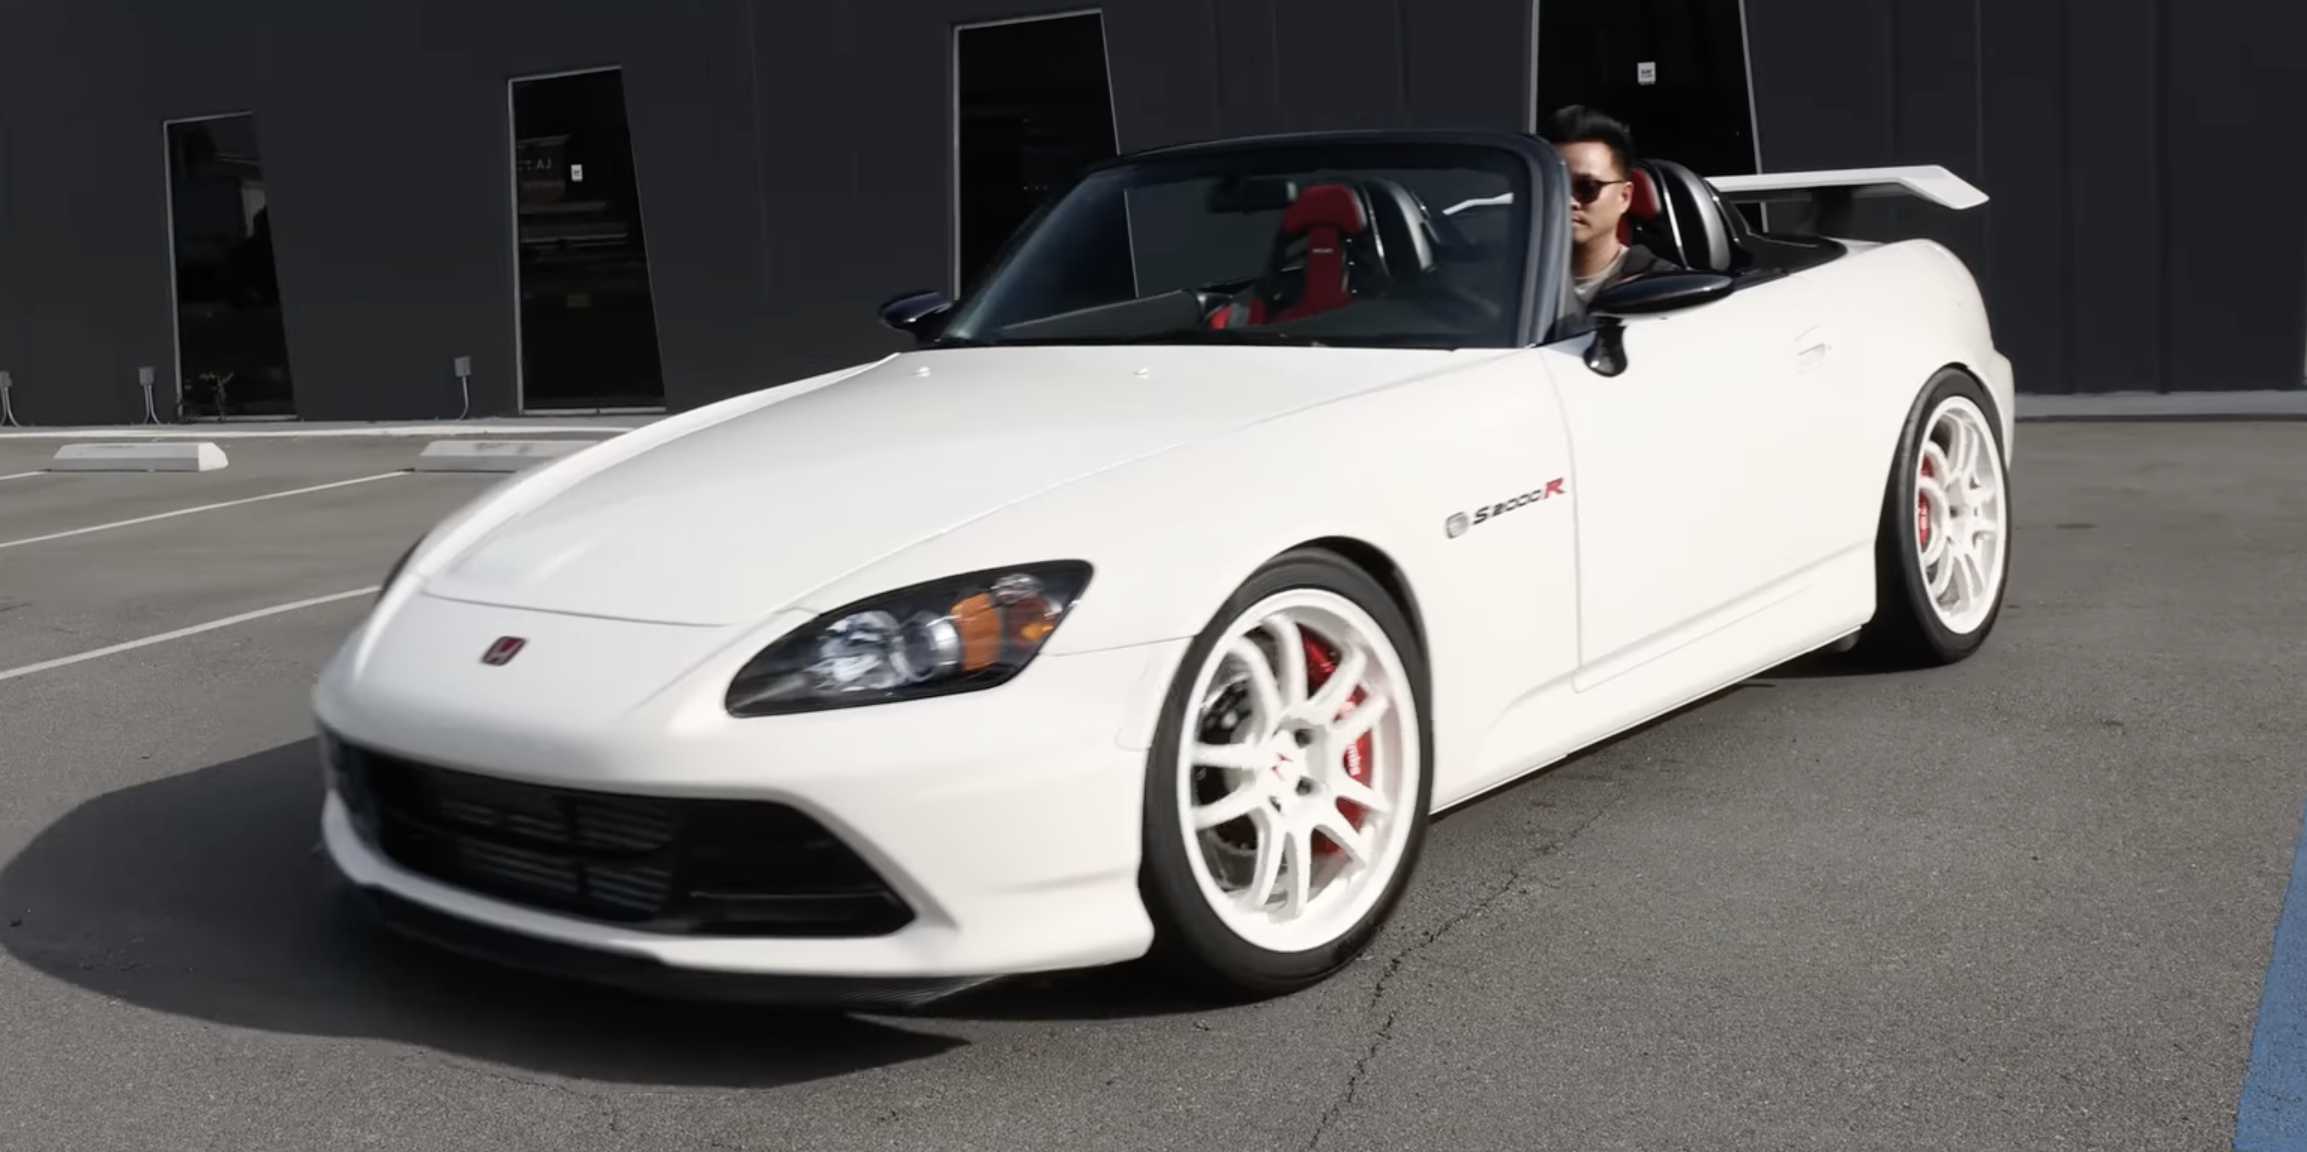 Here's an In-Depth Tour of the Wonderful Honda S2000R Restomod